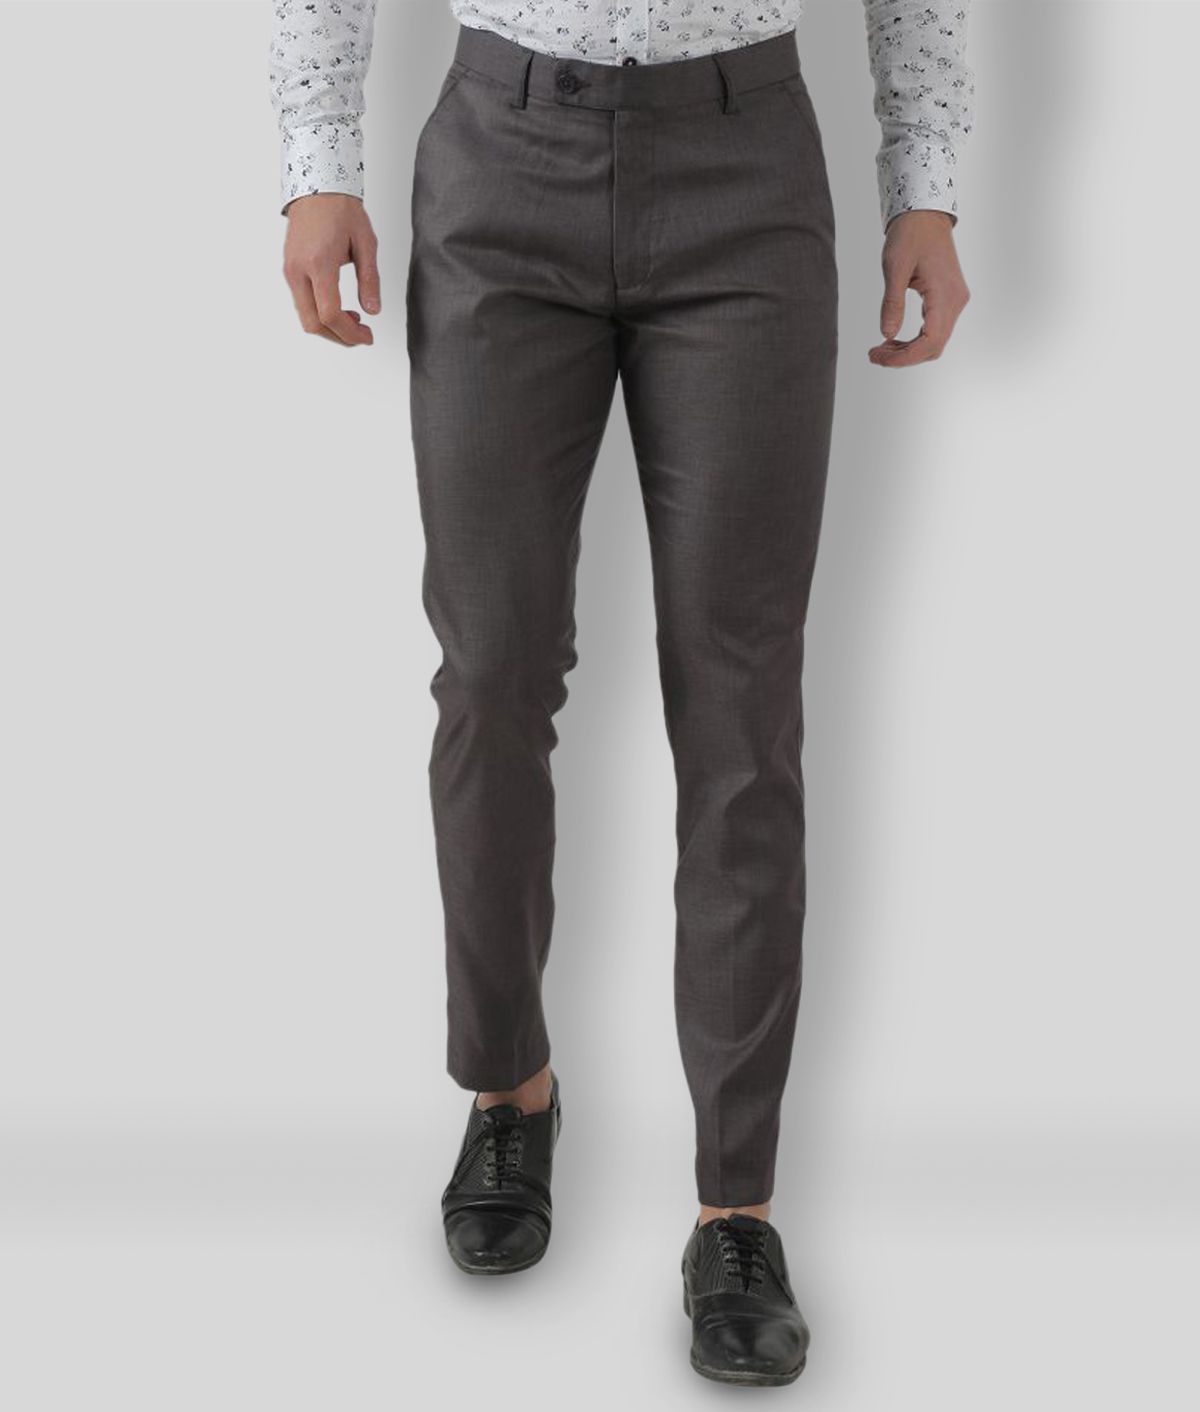     			Inspire Clothing Inspiration - Grey Polycotton Slim - Fit Men's Chinos ( Pack of 1 )